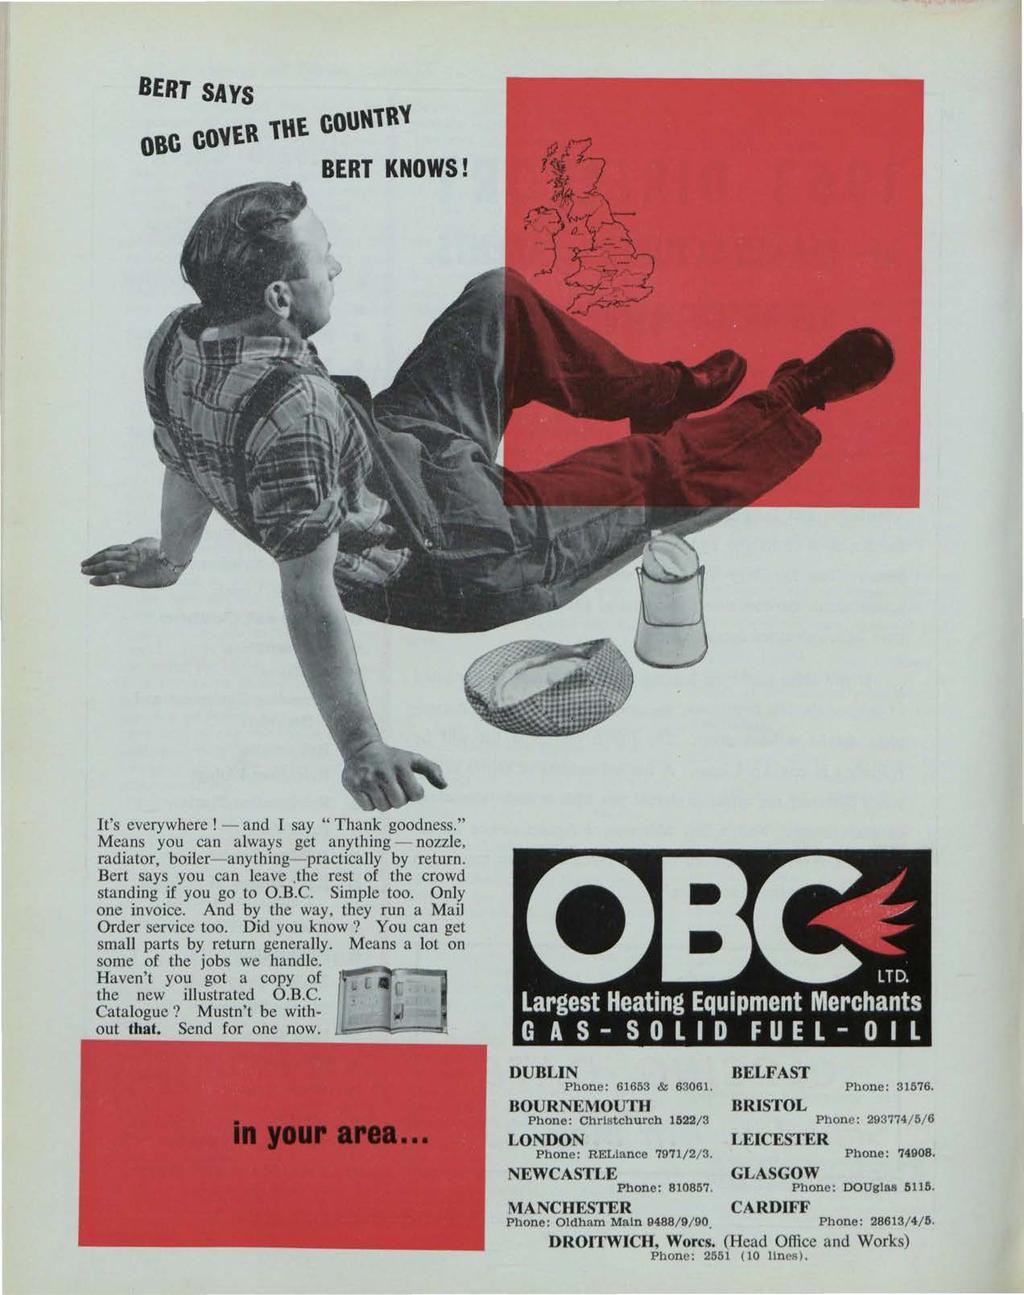 BERT SAYS OBG GOVER 18 GOUN1R1 BERT KNOWS! Building Services News, Vol. 2, Iss. 12 [1963], Art. 1 It's everywhere! - and I say "Thank goodness.